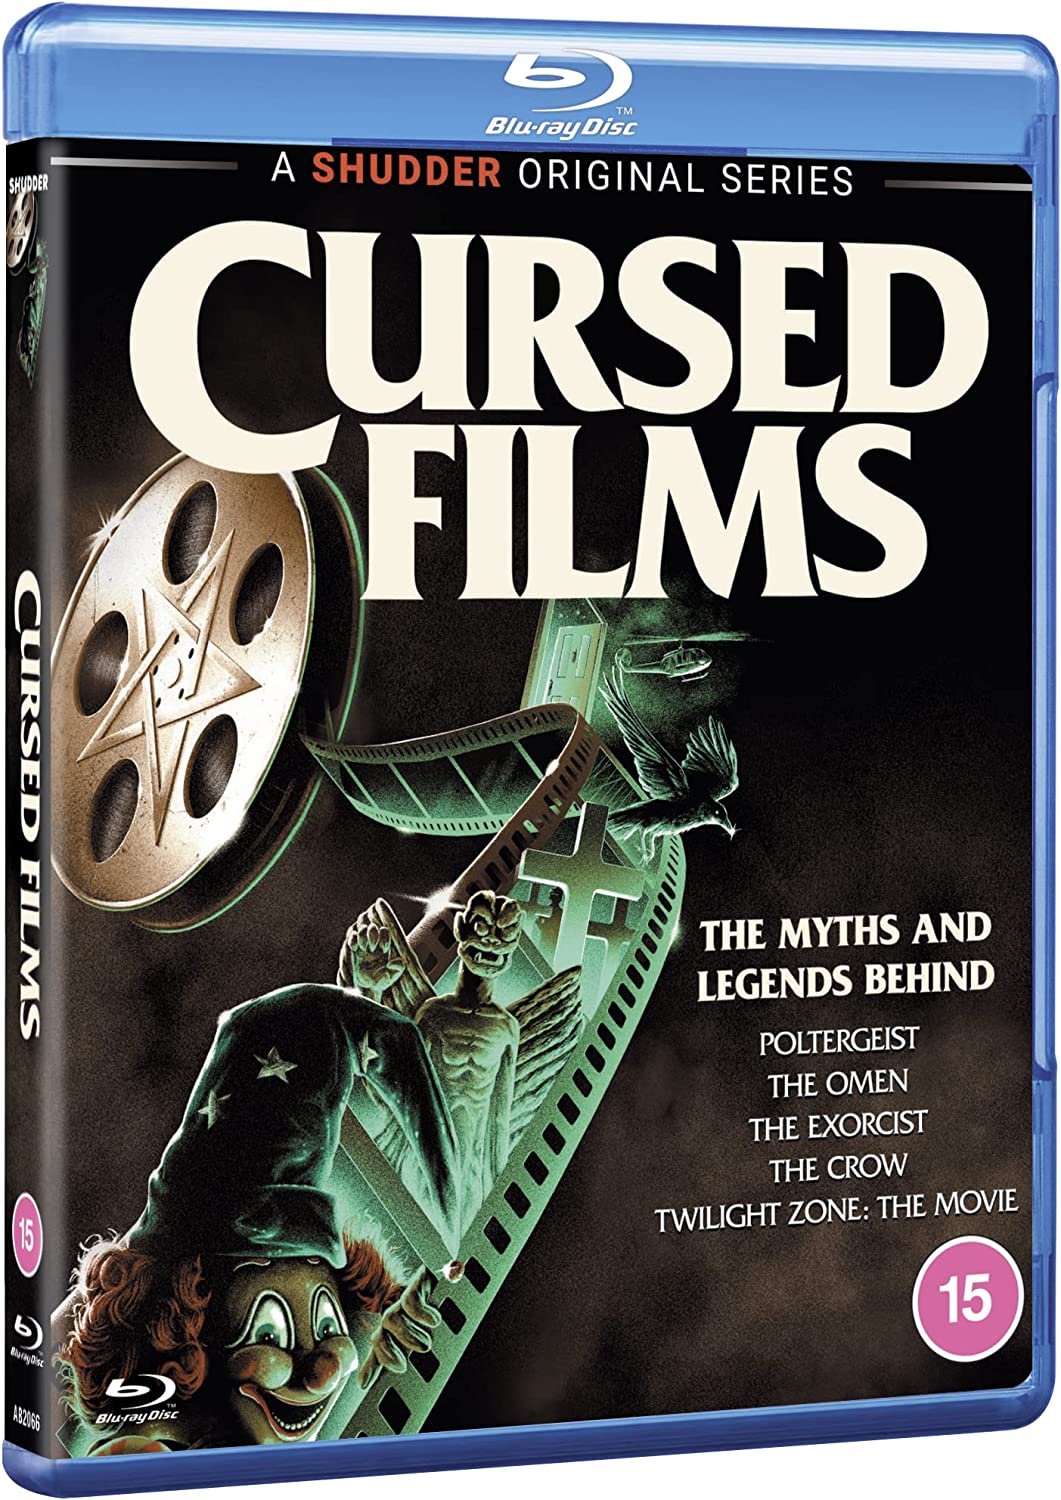 Cursed Films DVD cover